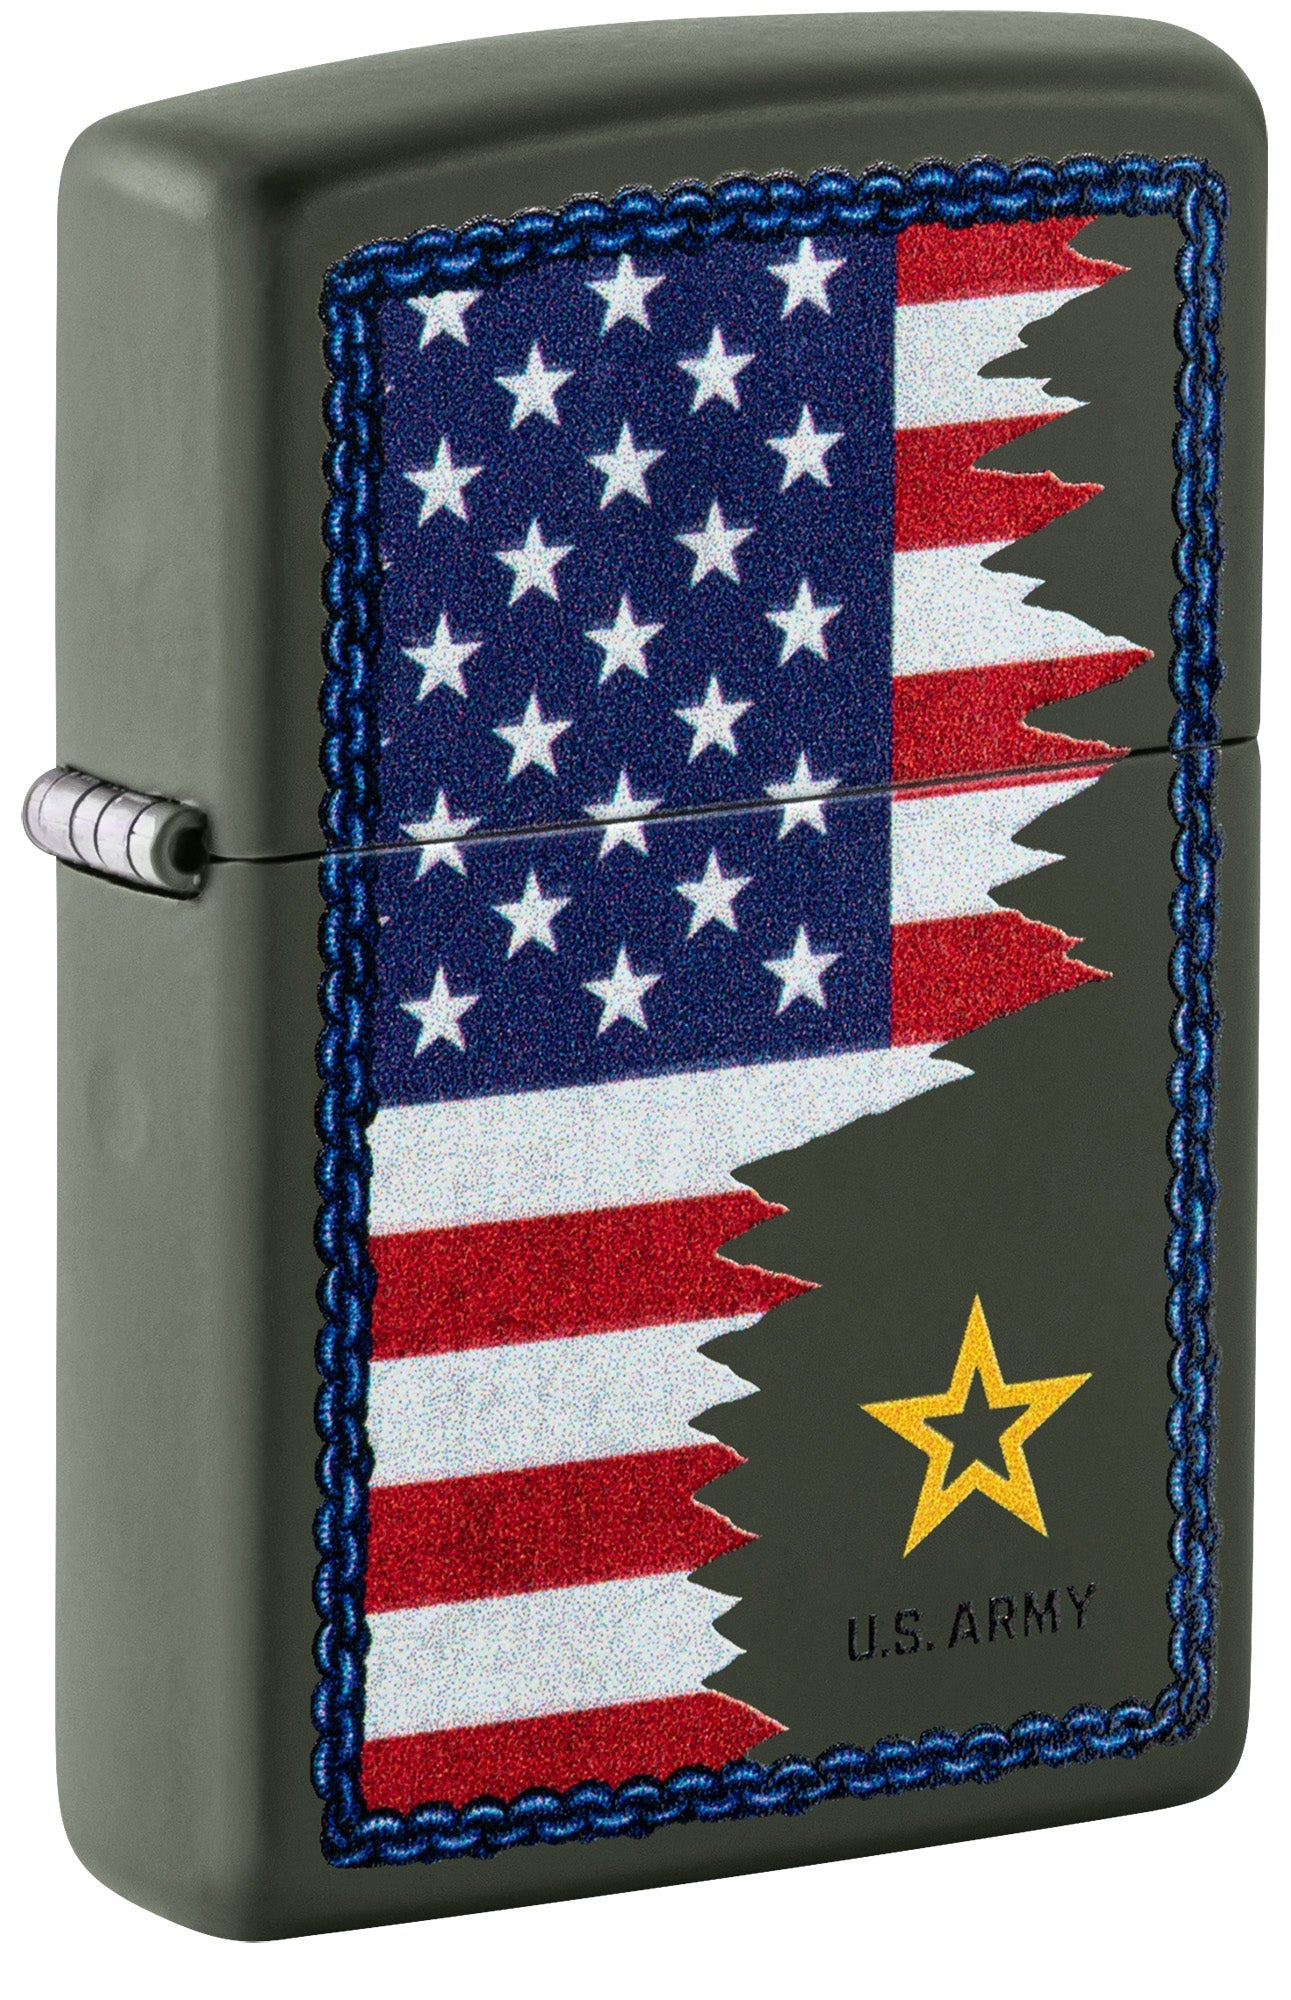 Zippo Lighter: U.S. Army and Flag - Green Matte 81533